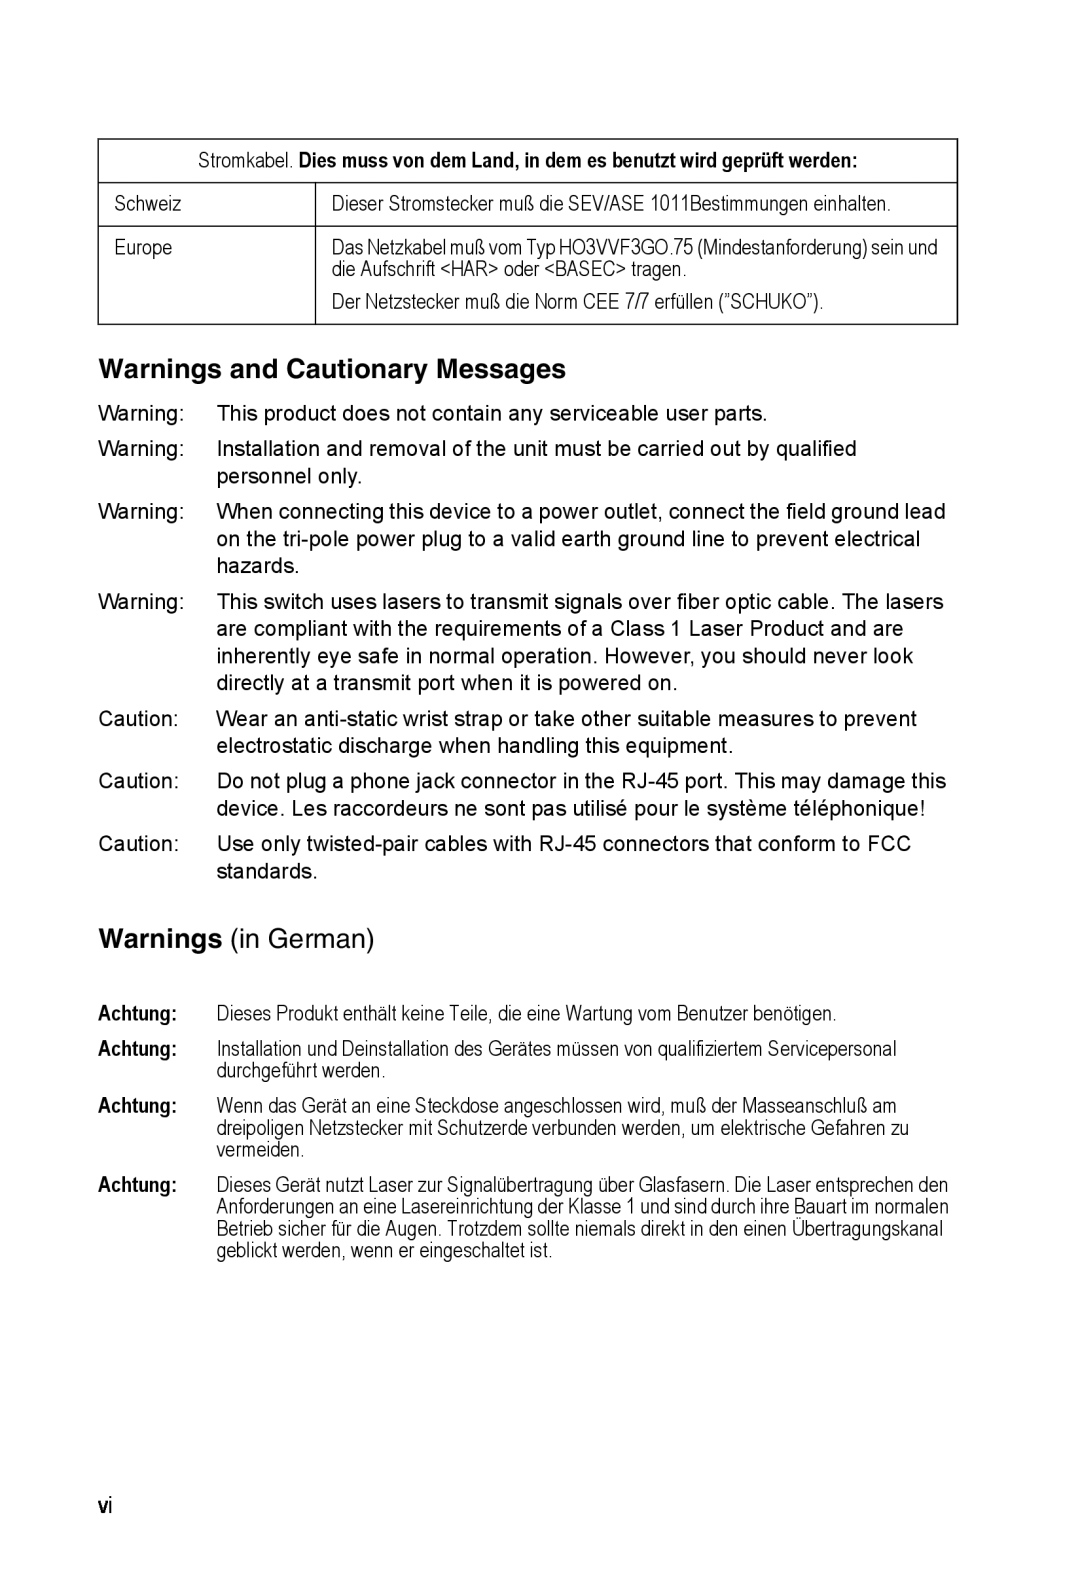 Accton Technology ES4324 manual Warnings and Cautionary Messages, Warnings in German 